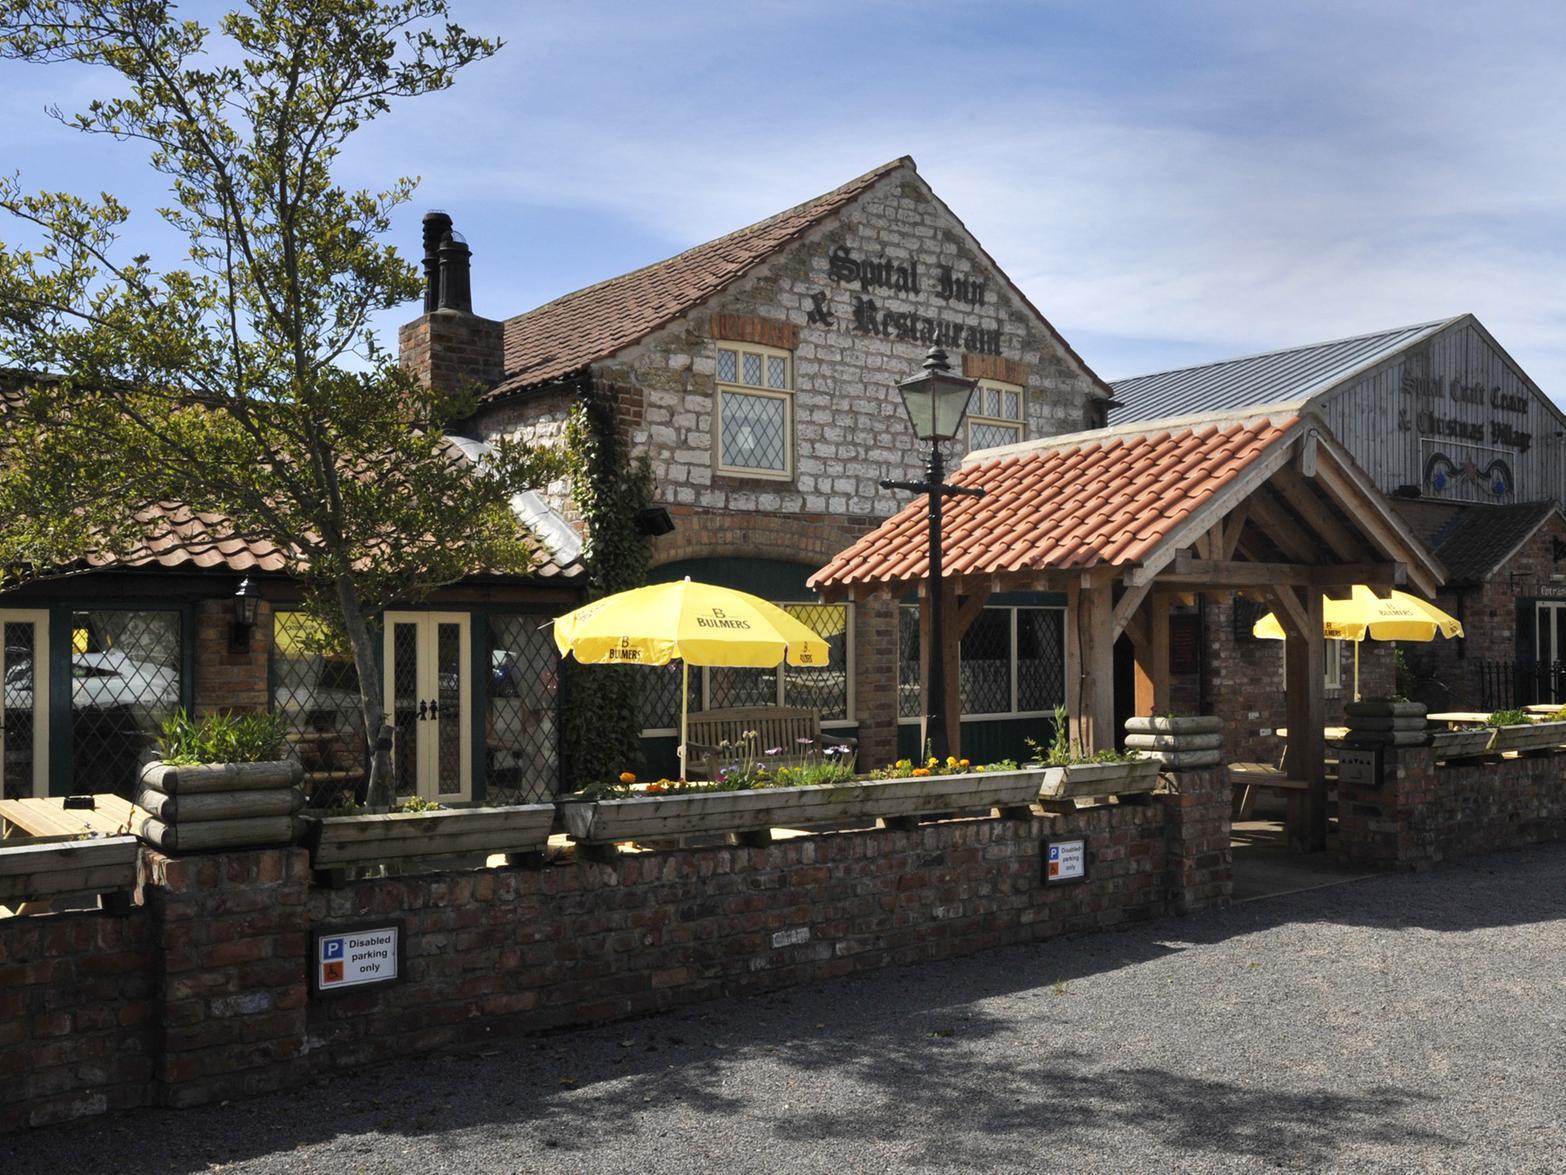 A reviewer said: The evening meal in the pub was delicious and we were served by very friendly and welcoming staff. A wonderful experience and we can't wait to come back.